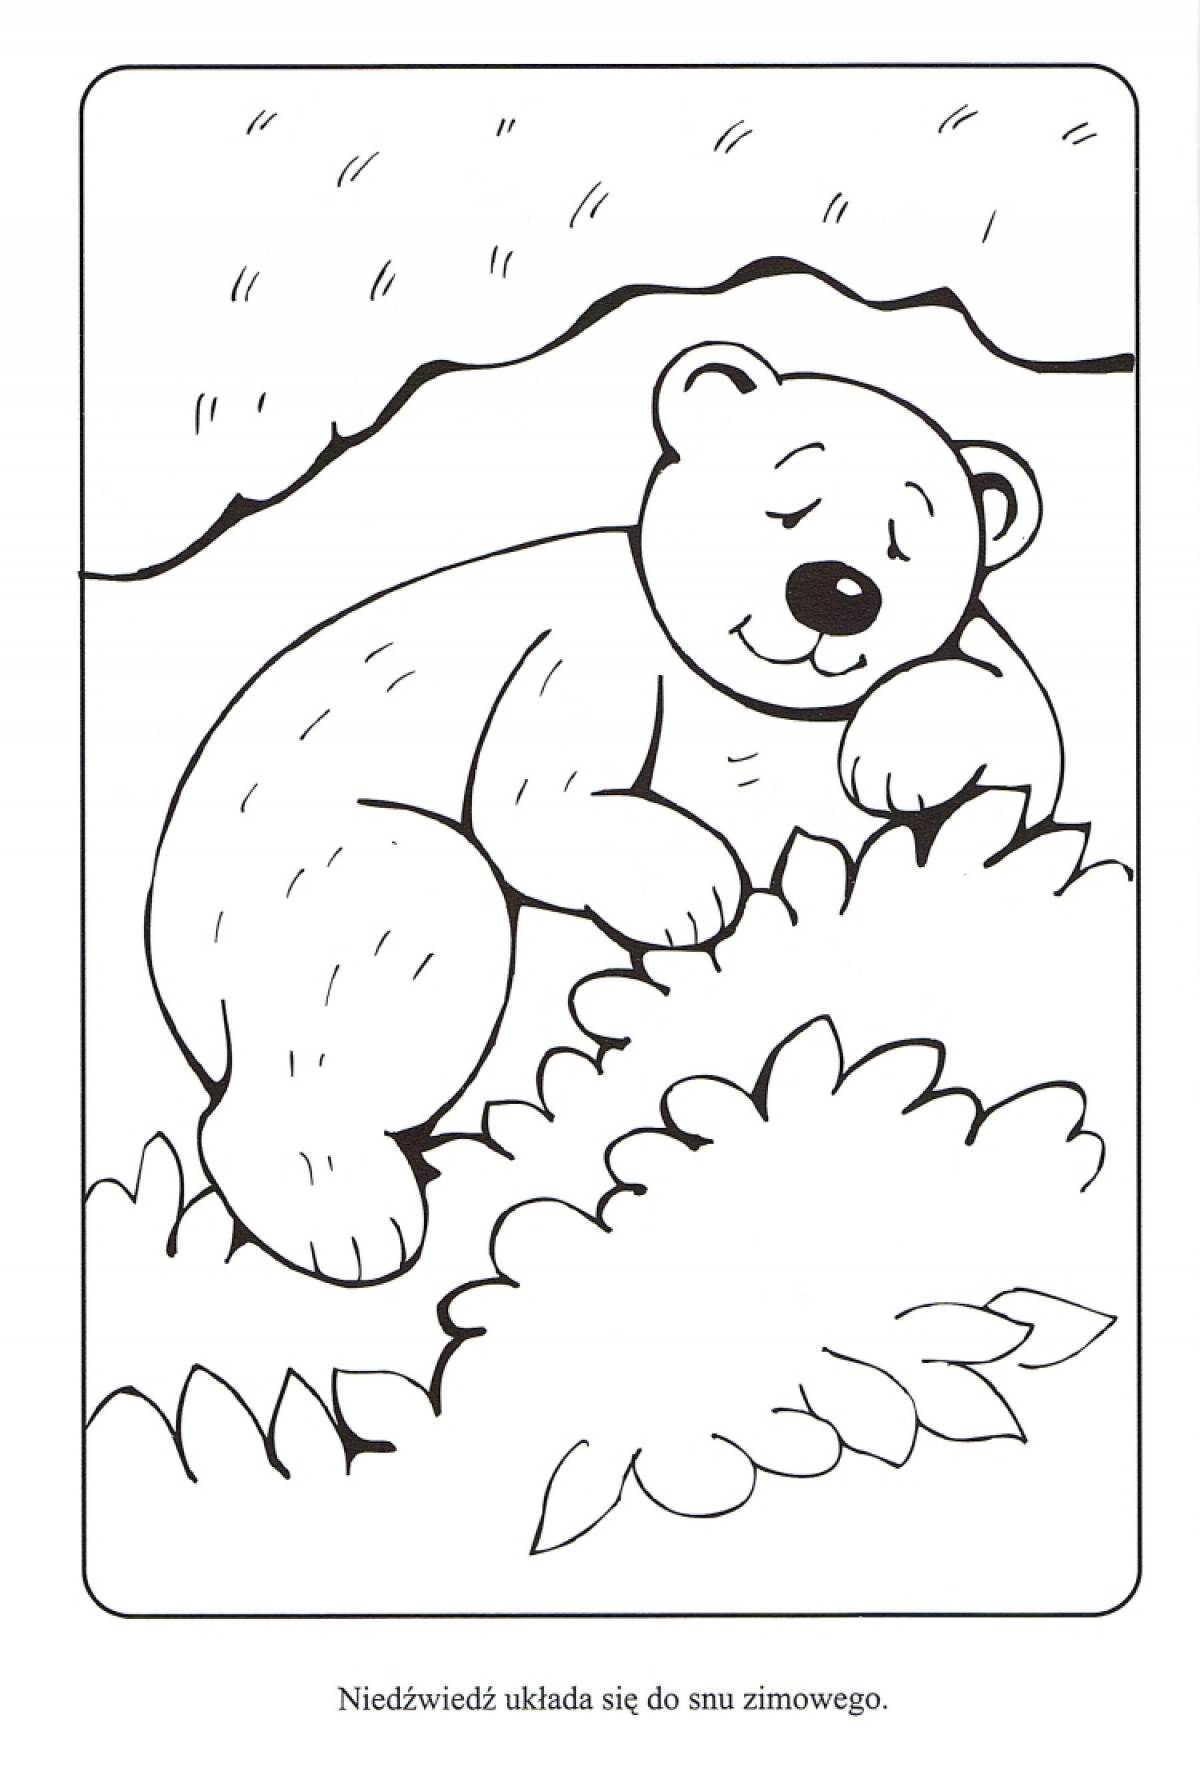 Adorable bear cub in the den coloring book for children